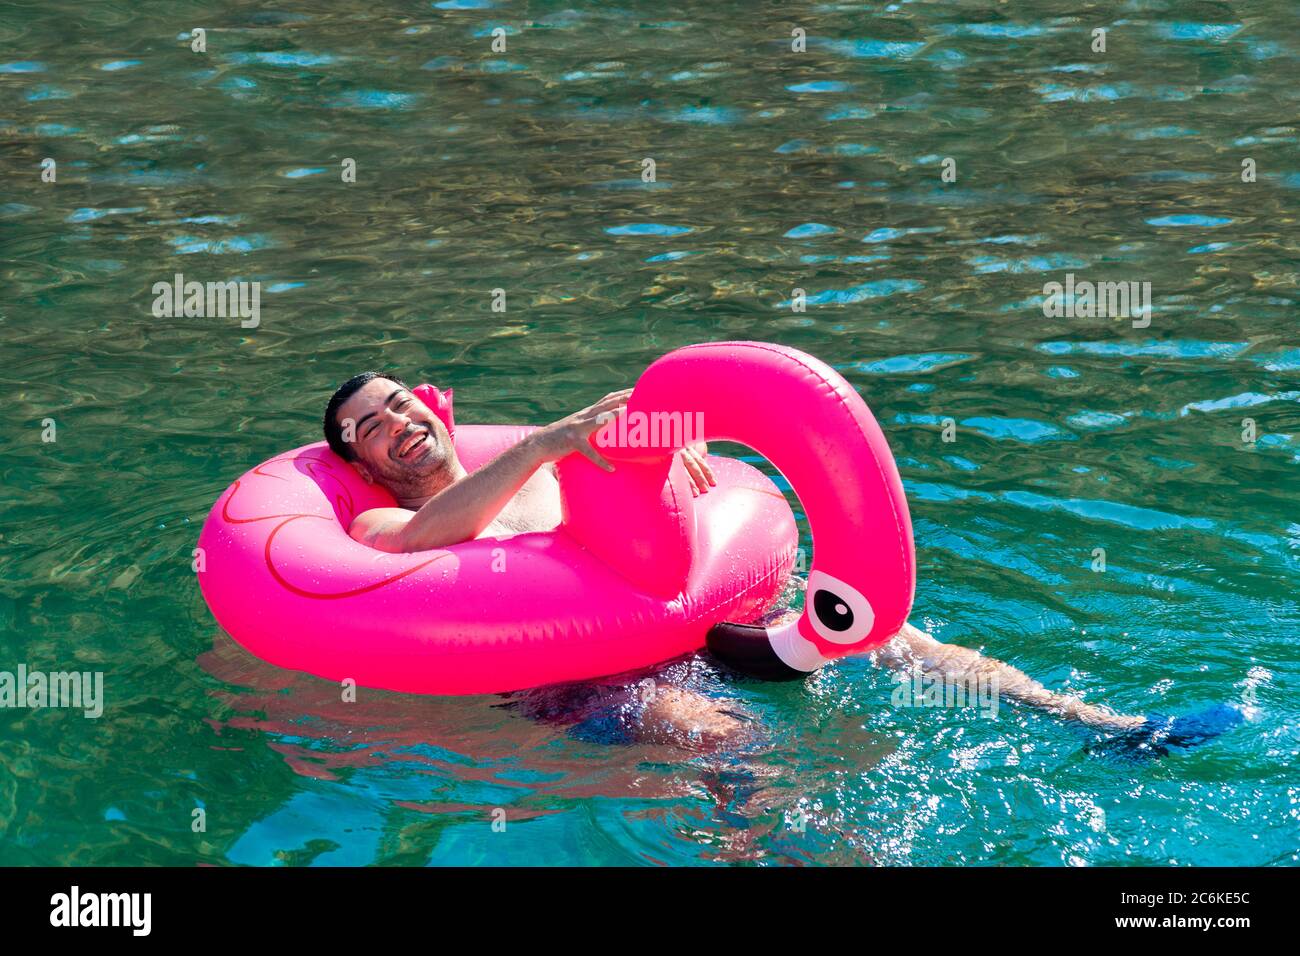 Cute and funny man enjoying on his inflated pink flamingo in sunny day. Stock Photo